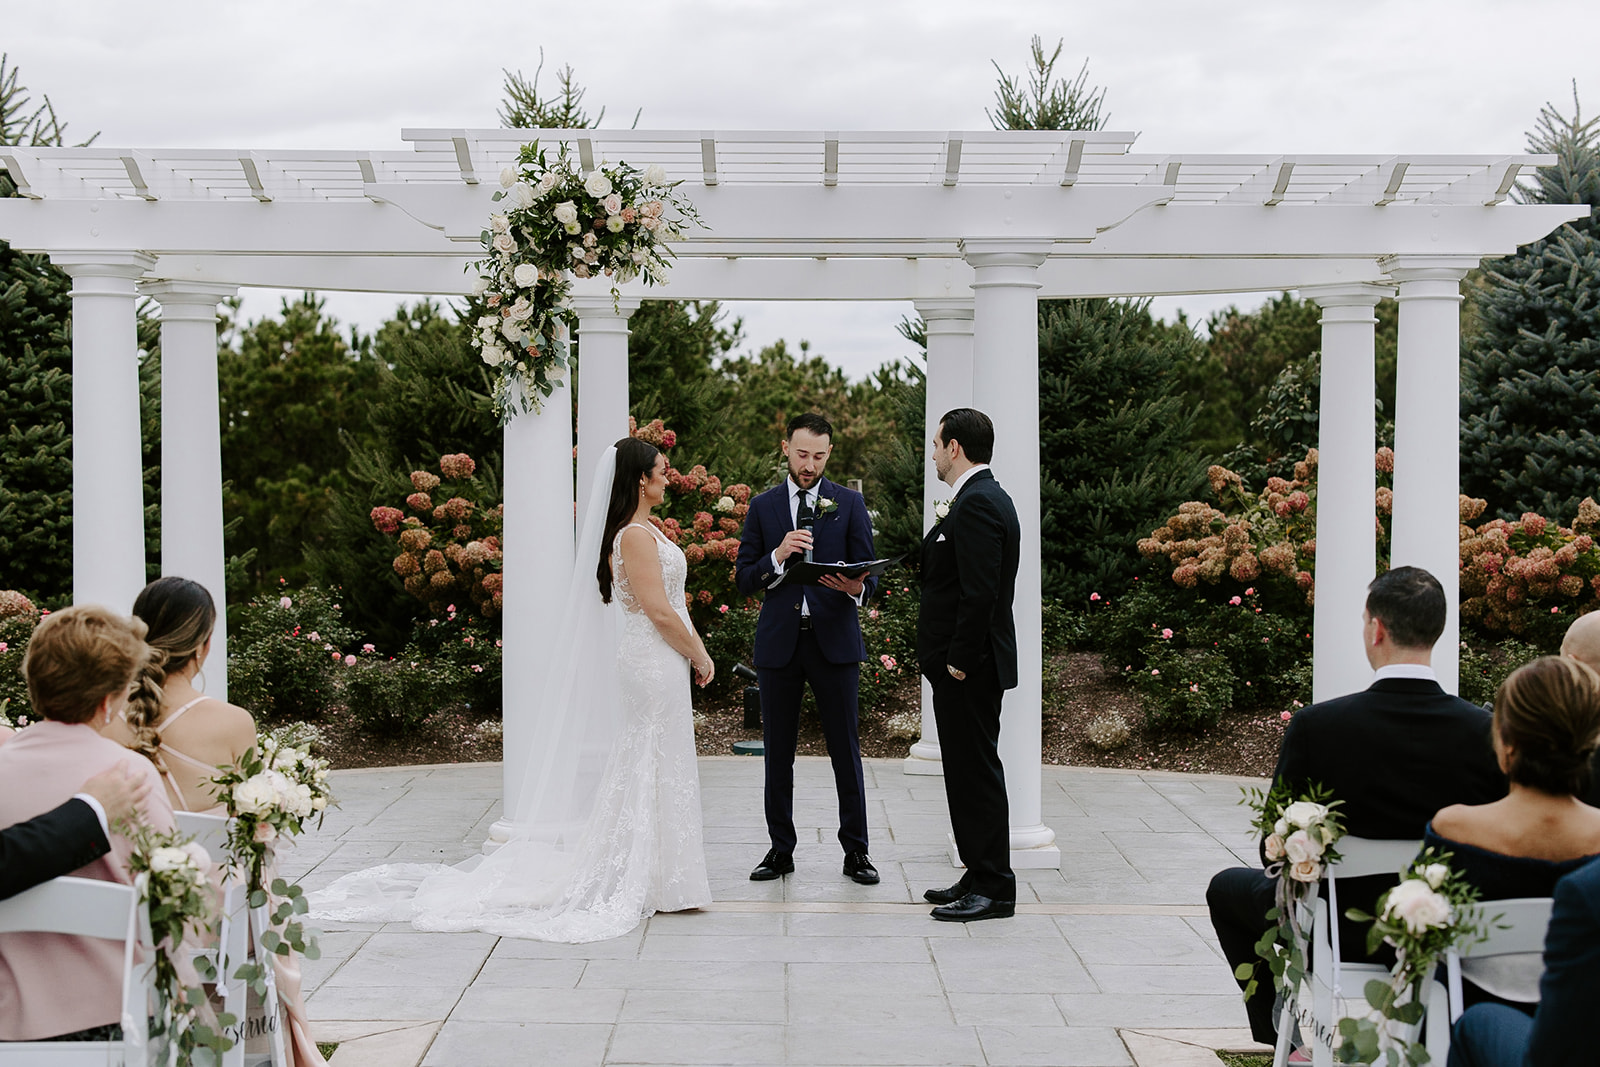 Stunning bride and groom stand together during their perfect New England wedding day